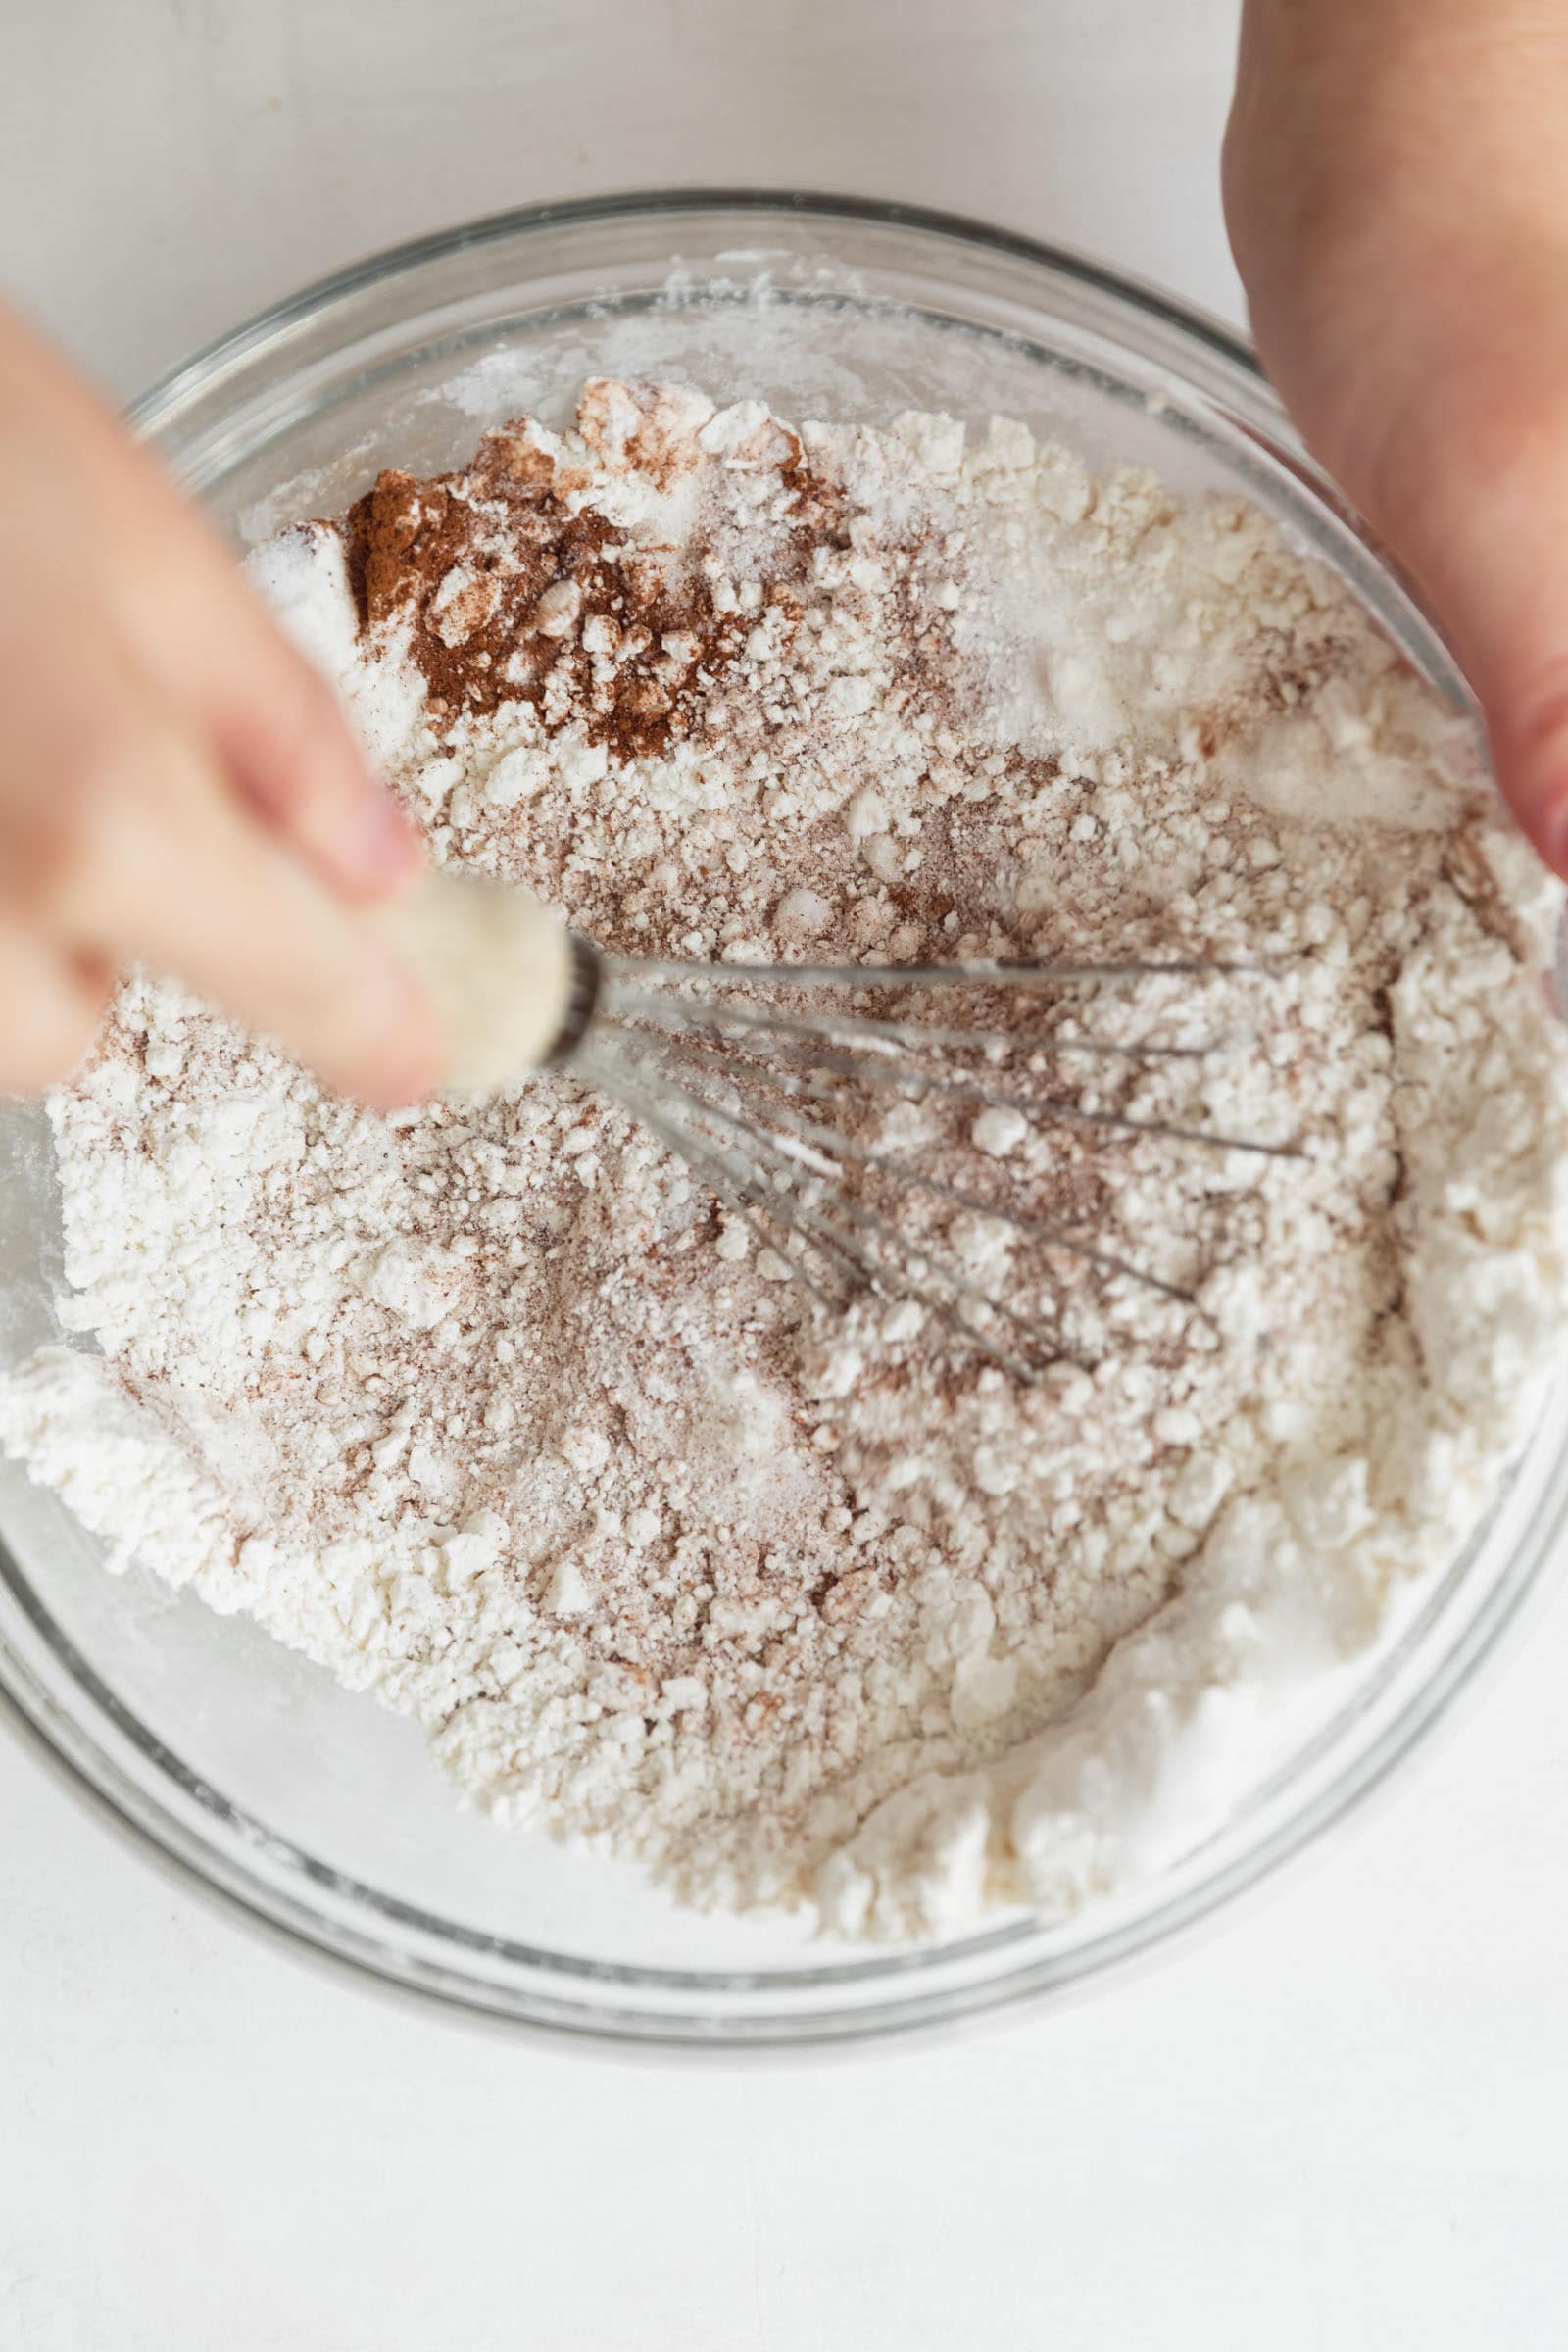 dry ingredients mixing together